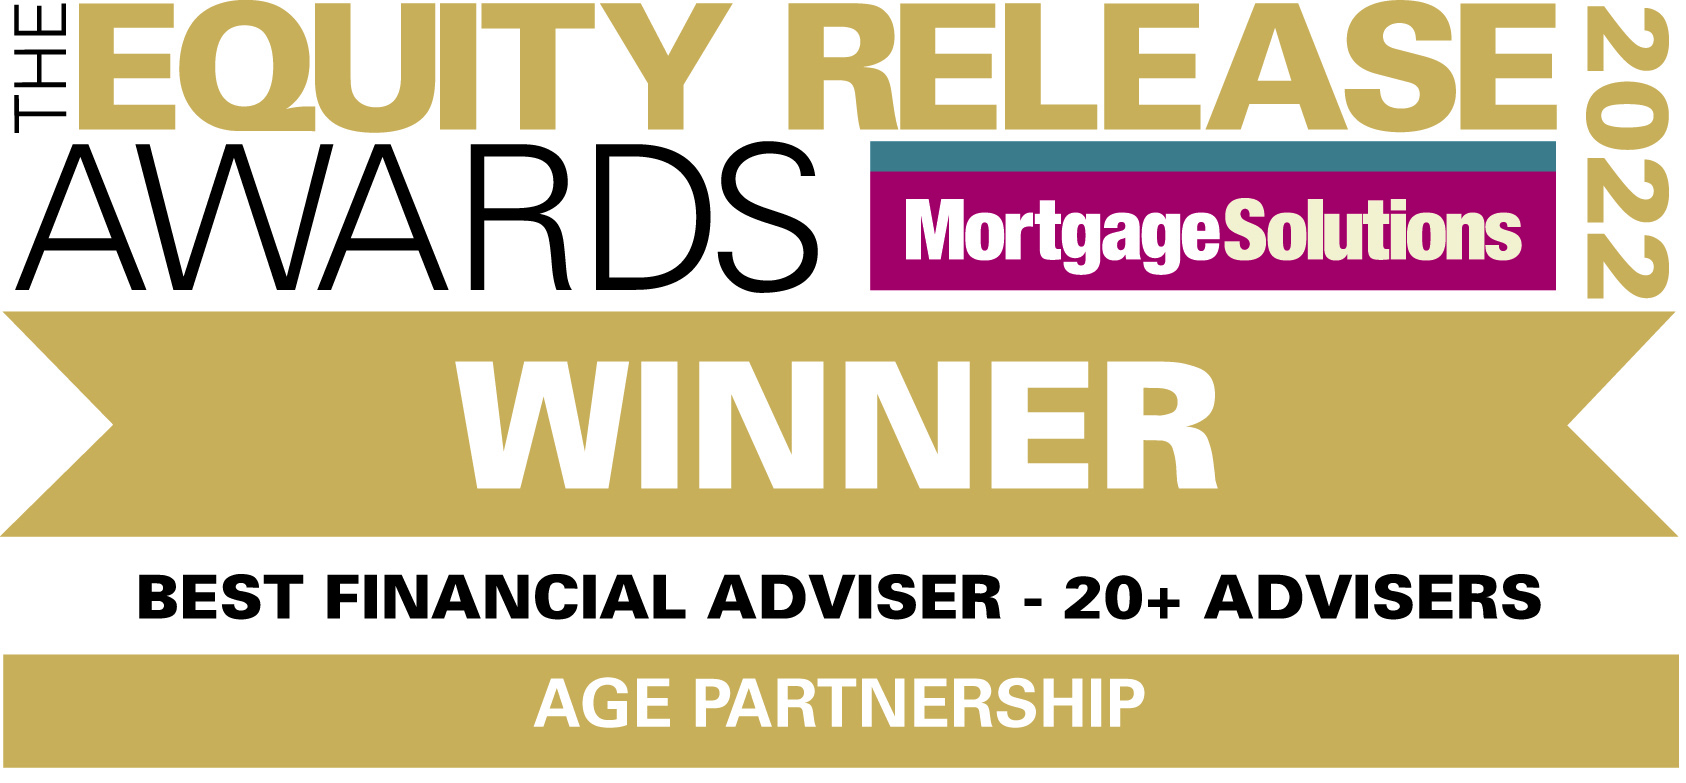 Equity Release Mortgage Solutions Winner logo